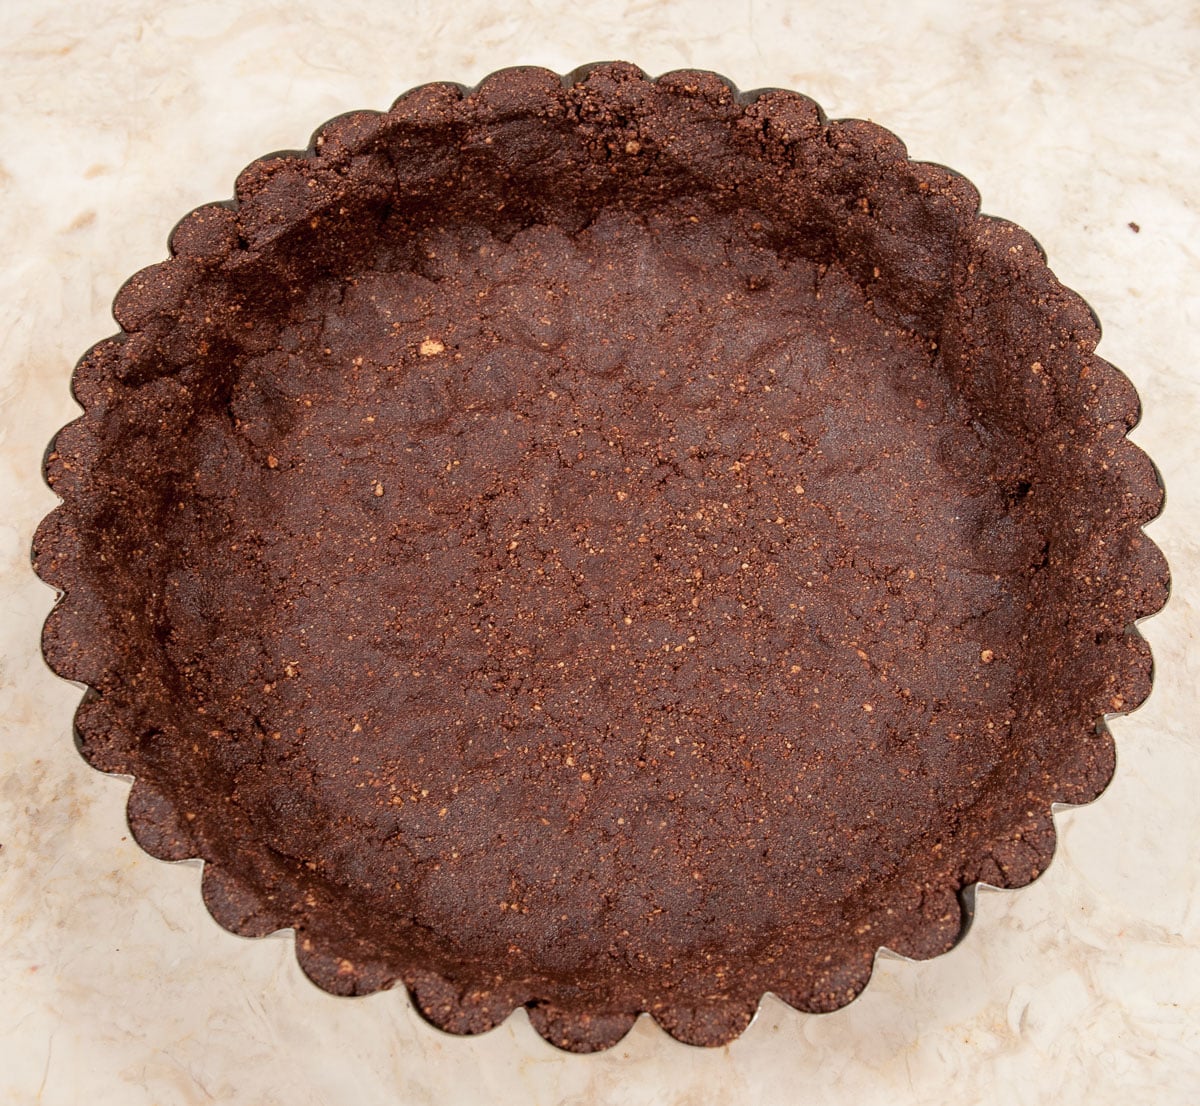 The remaining ⅓ of the crumbs are pressed into the bottom of the pan.